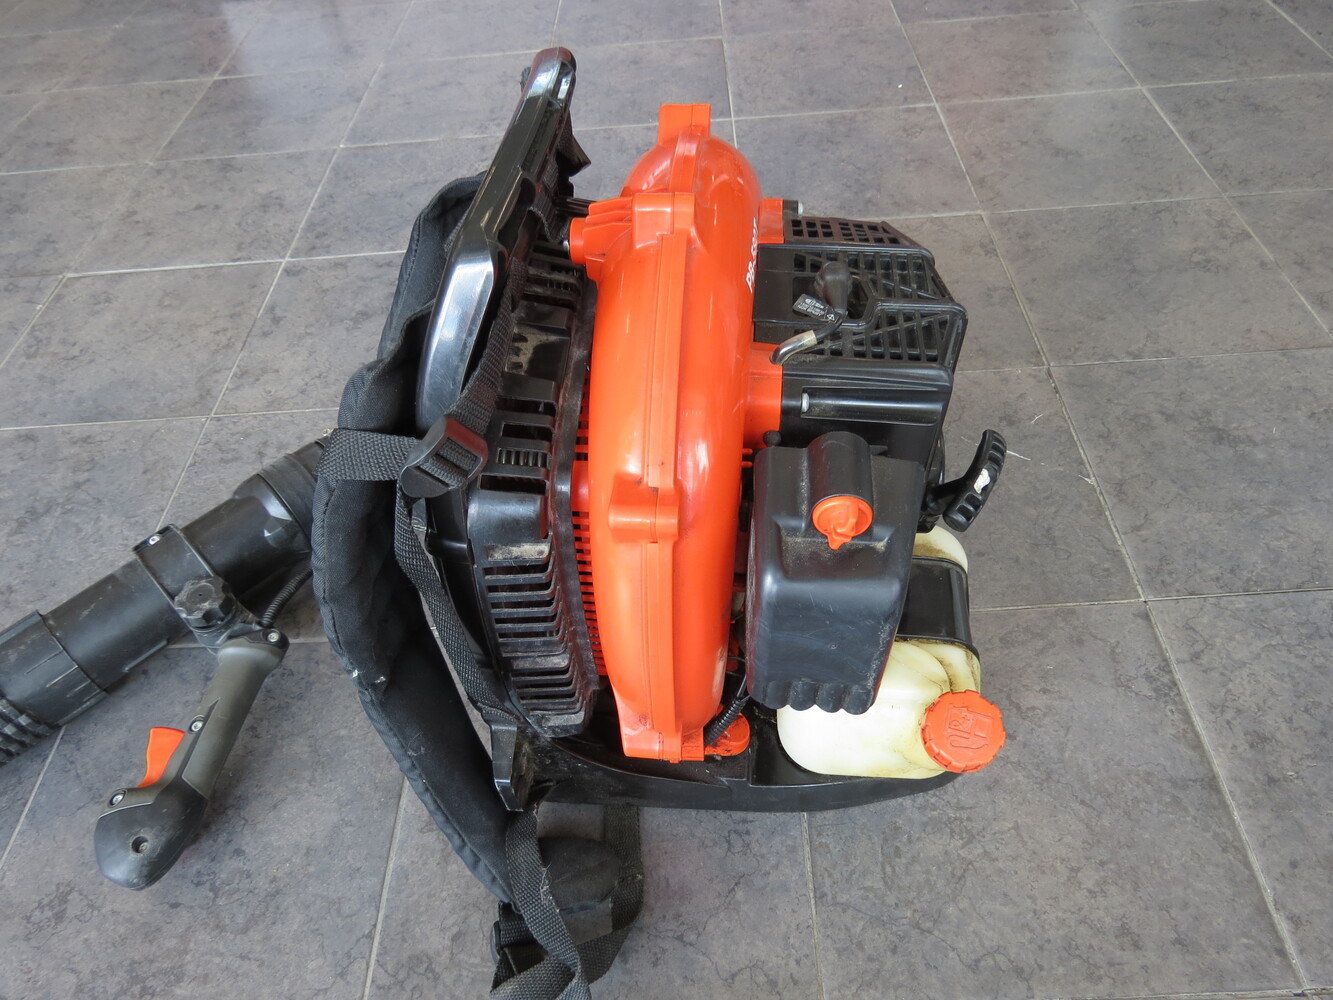 Echo PB-580T Commercial Gas Powered Backpack Leaf Blower